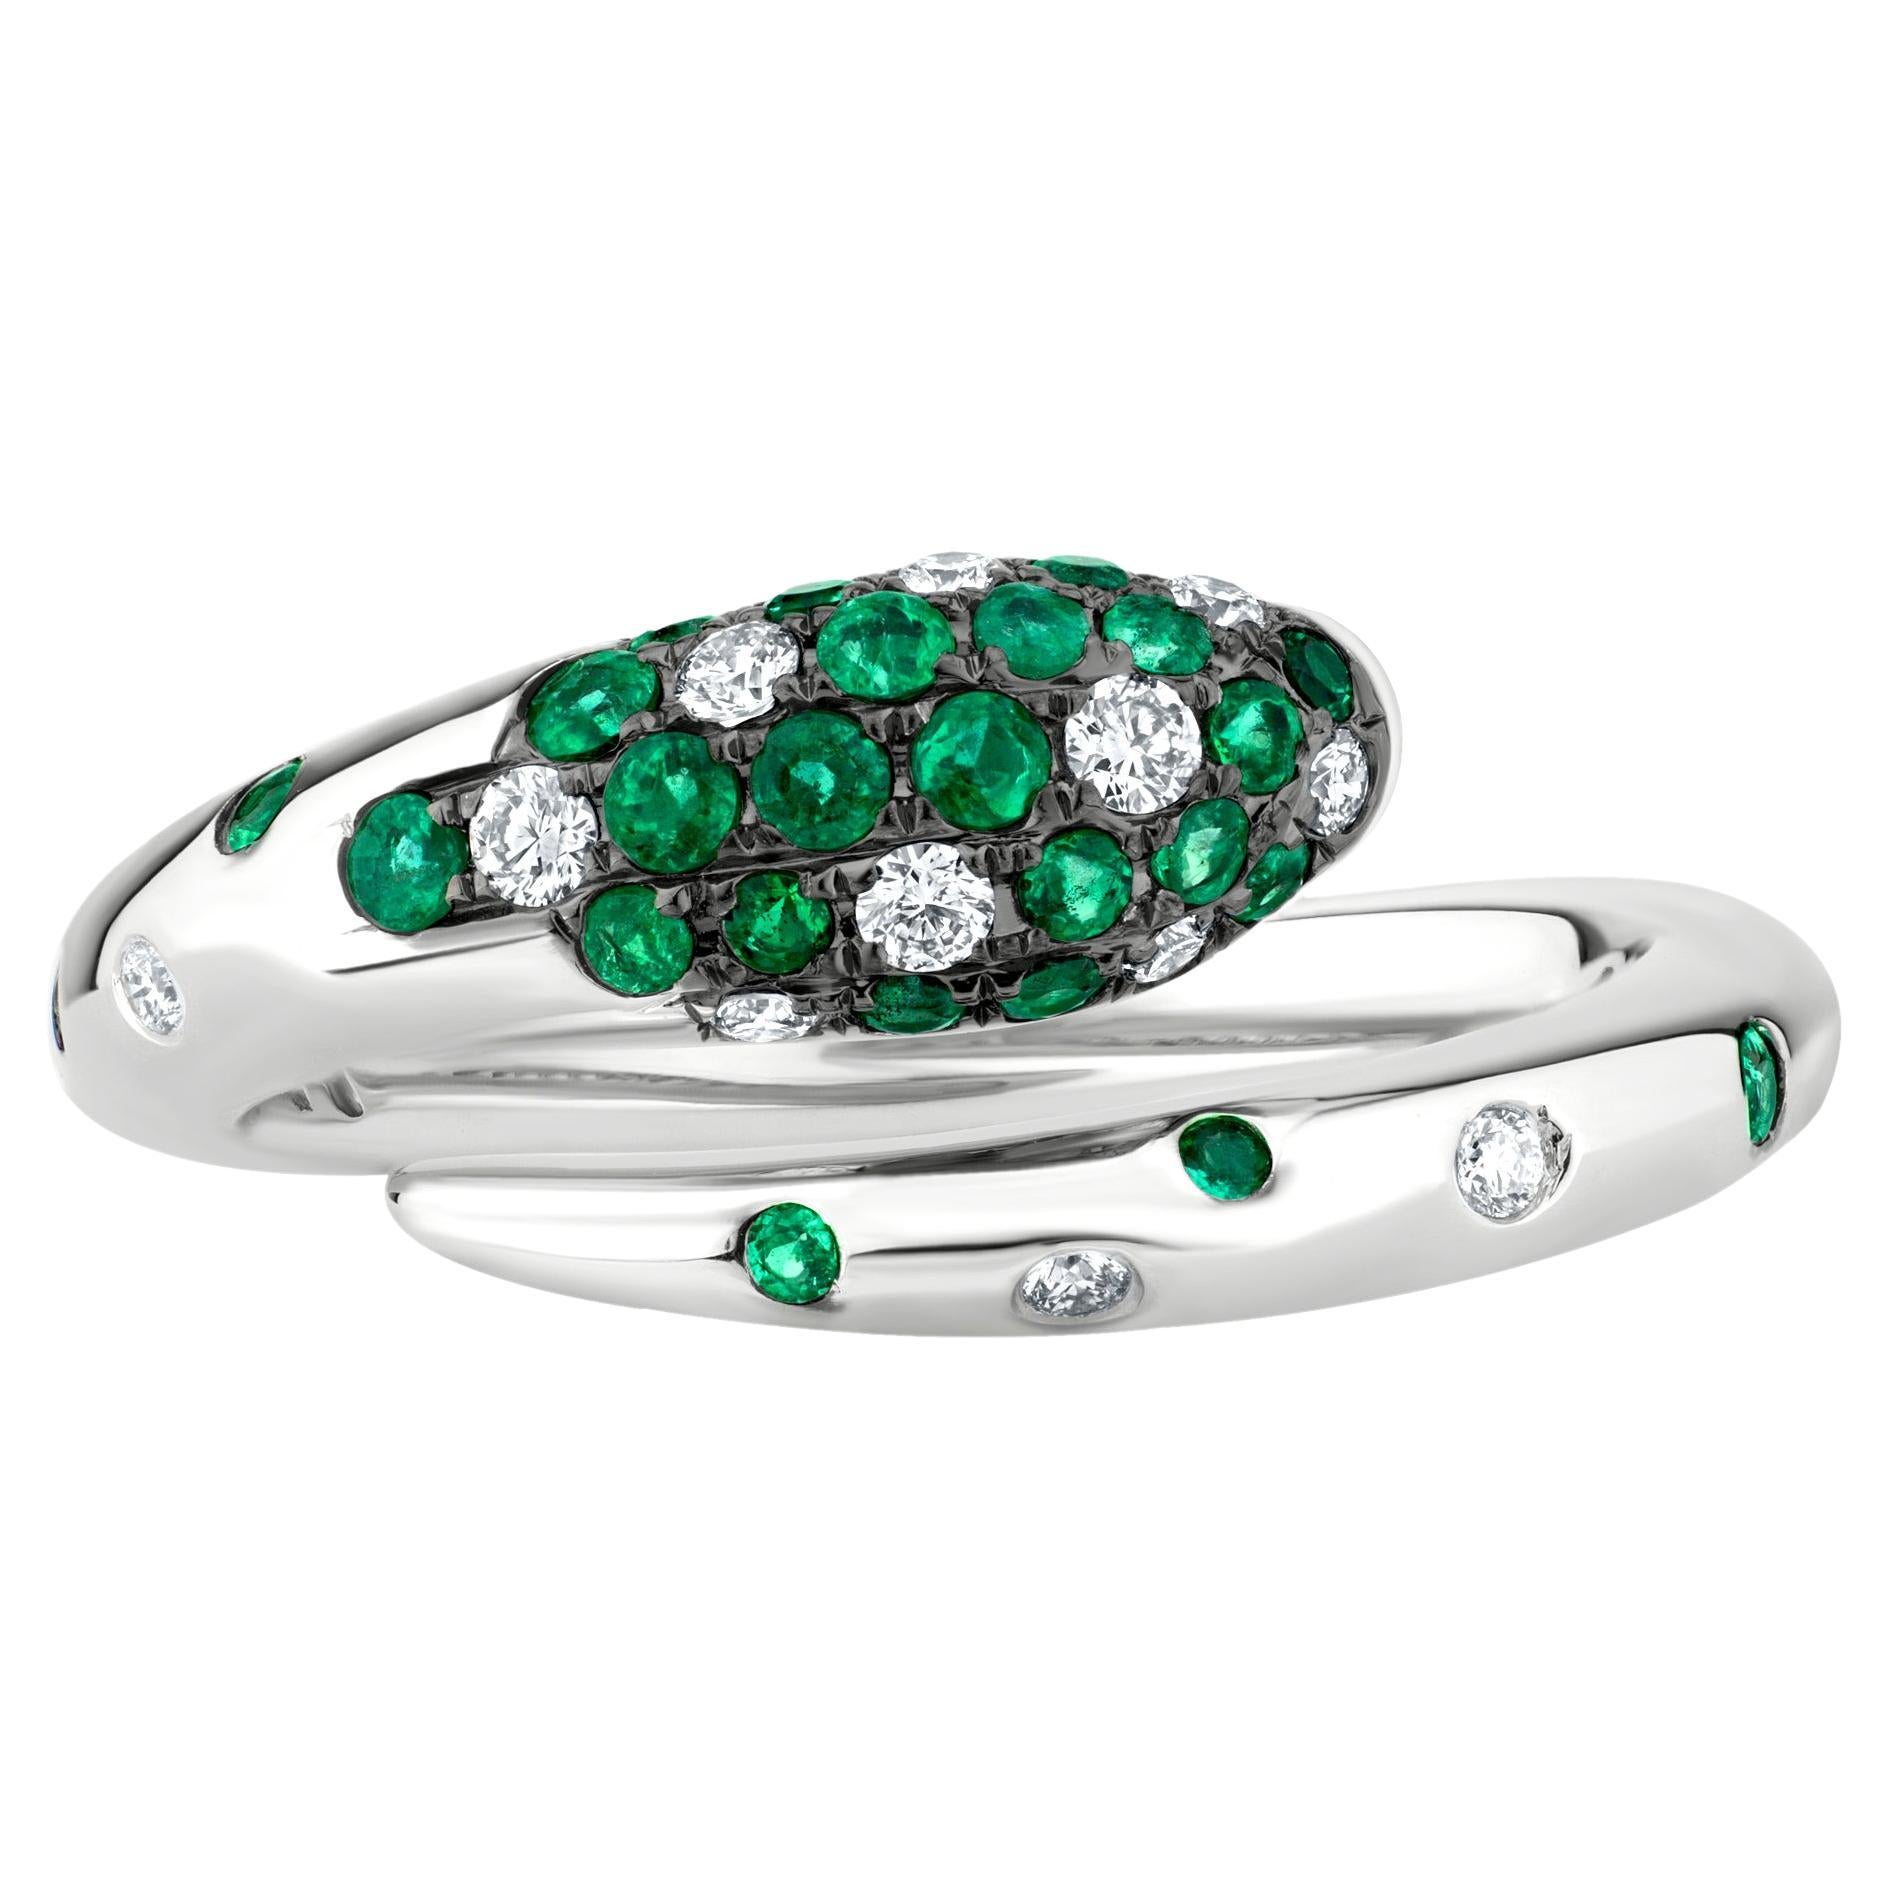 Luxle 0.48 Cttw. Emerald and Diamond Bypass Serpent Ring in 18k White Gold